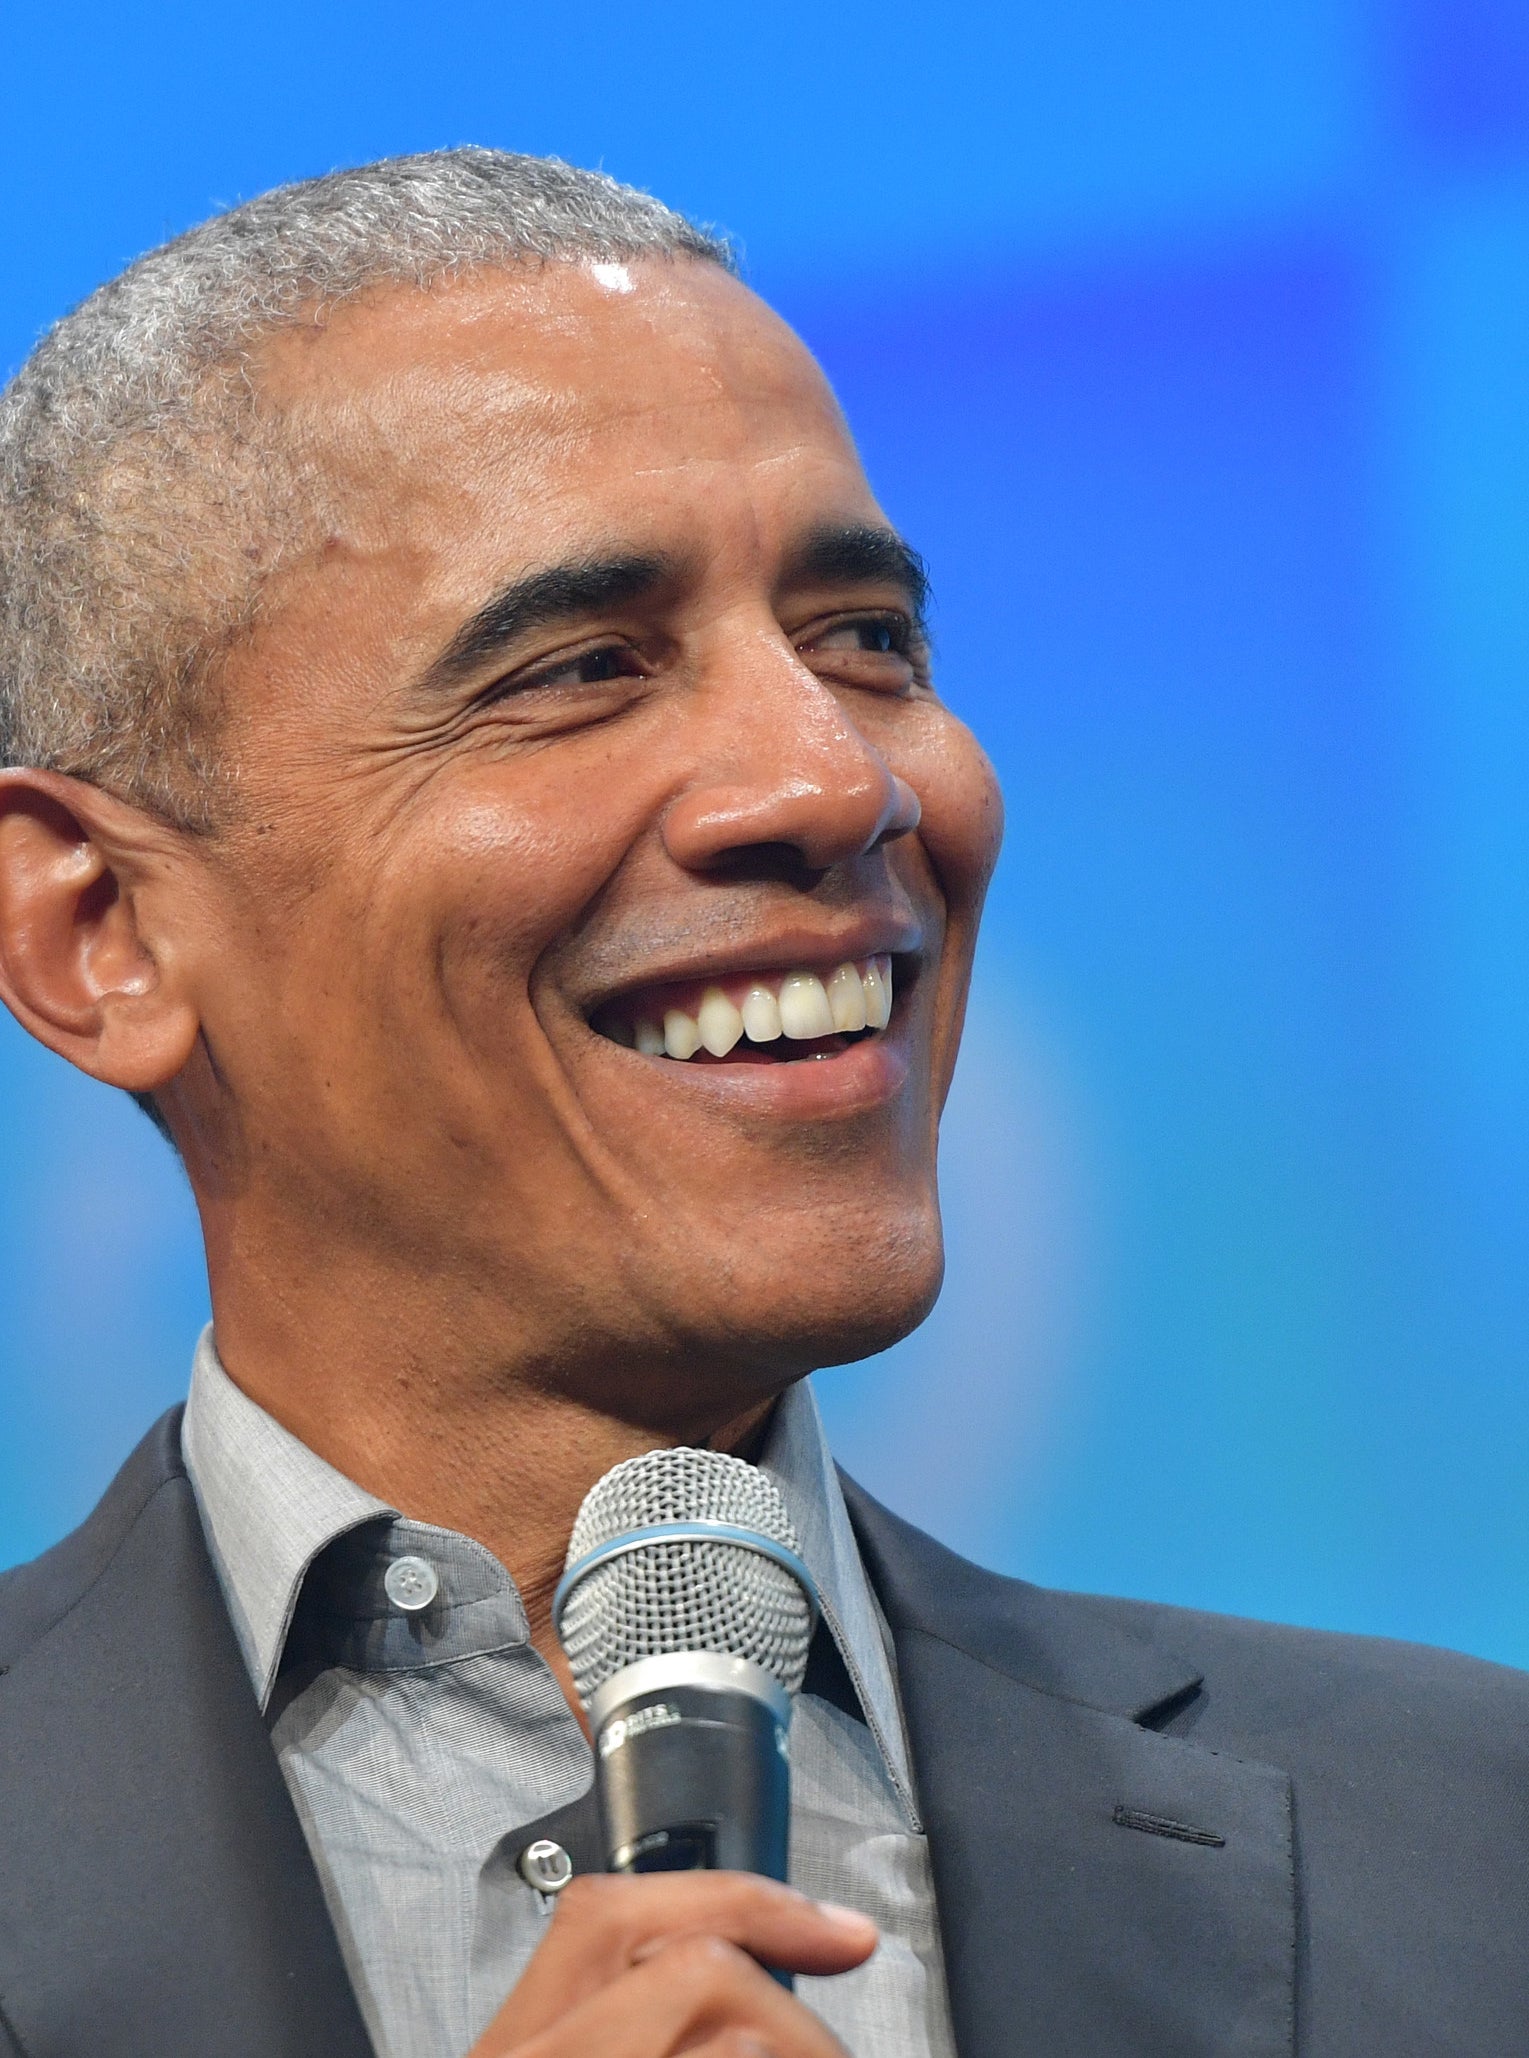 President Obama smiling as he holds a mic, wearing a suit